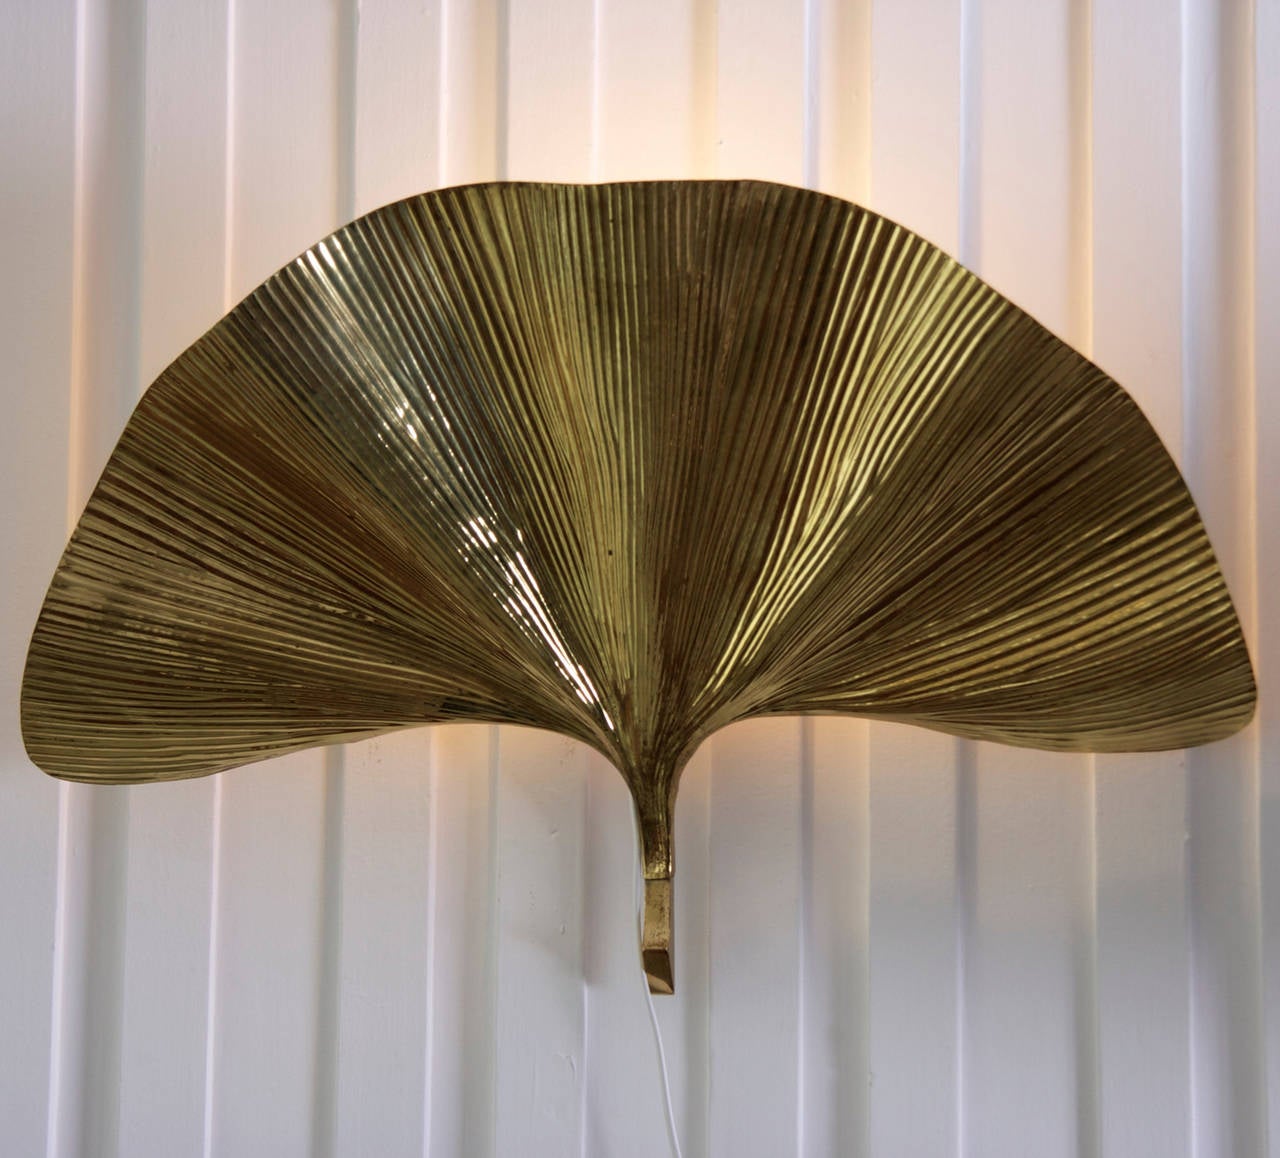 Rare pair of wonderful huge ginkgo leaf wall lamps by the Italian designer Tommaso Barbi. The lamps are made of brass and the reflexion of the light on the brass brings a cozy atmosphere in every room. The lamps are icons of the 1970s design and